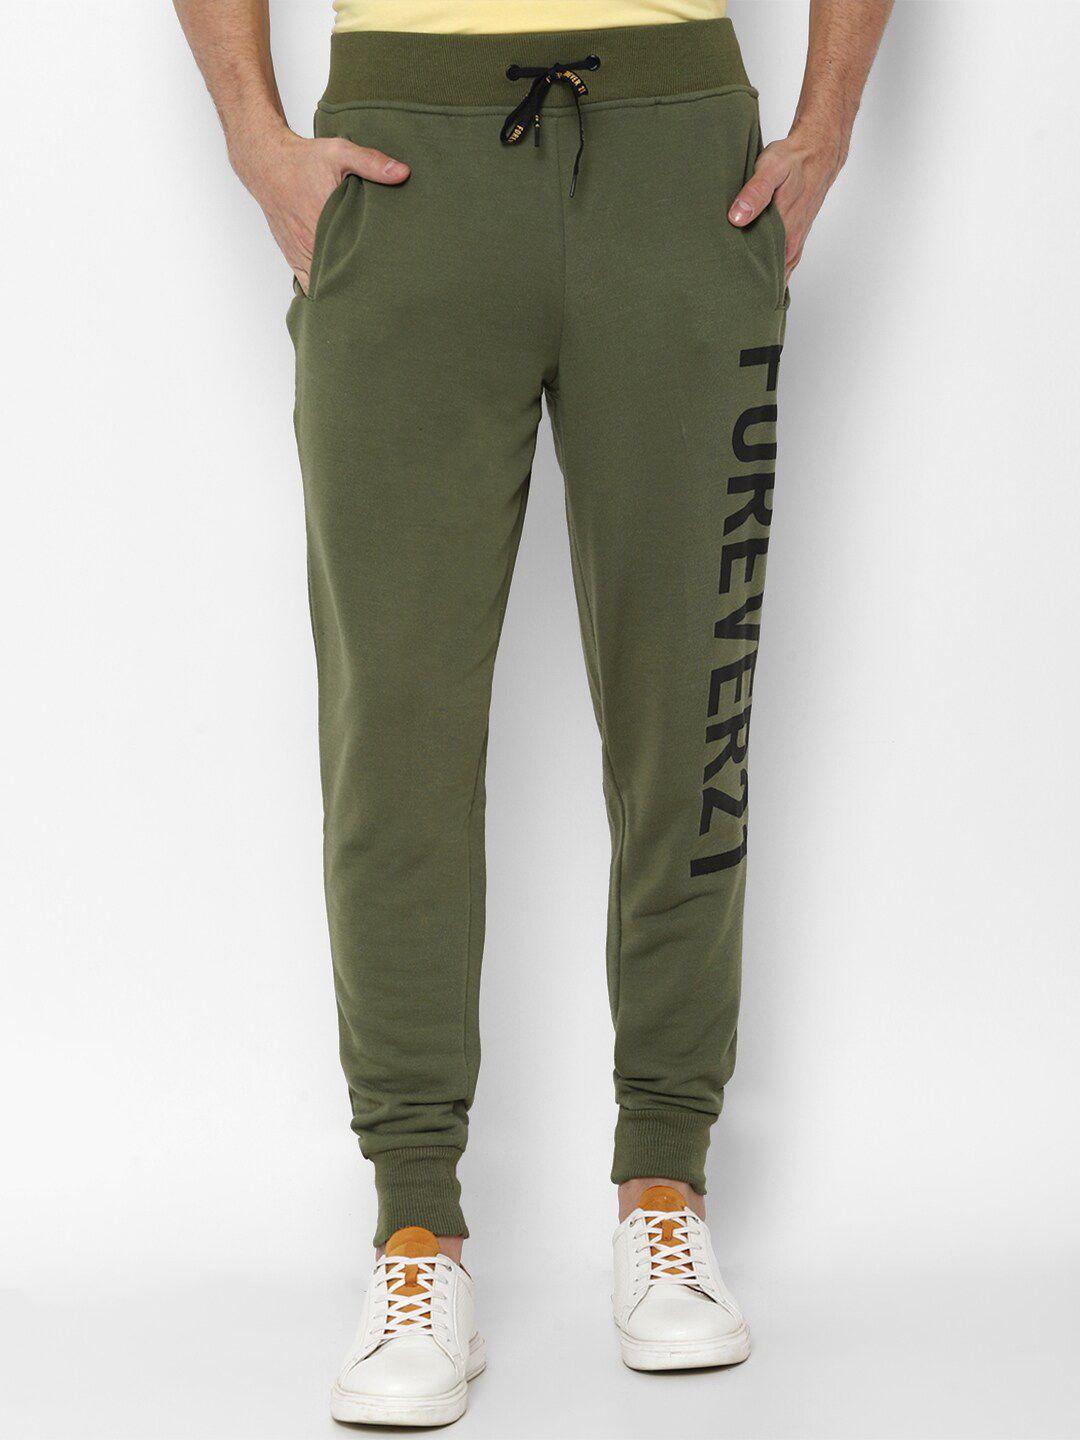 forever-21-olive-green-solid-active-sport-joggers-track-pant